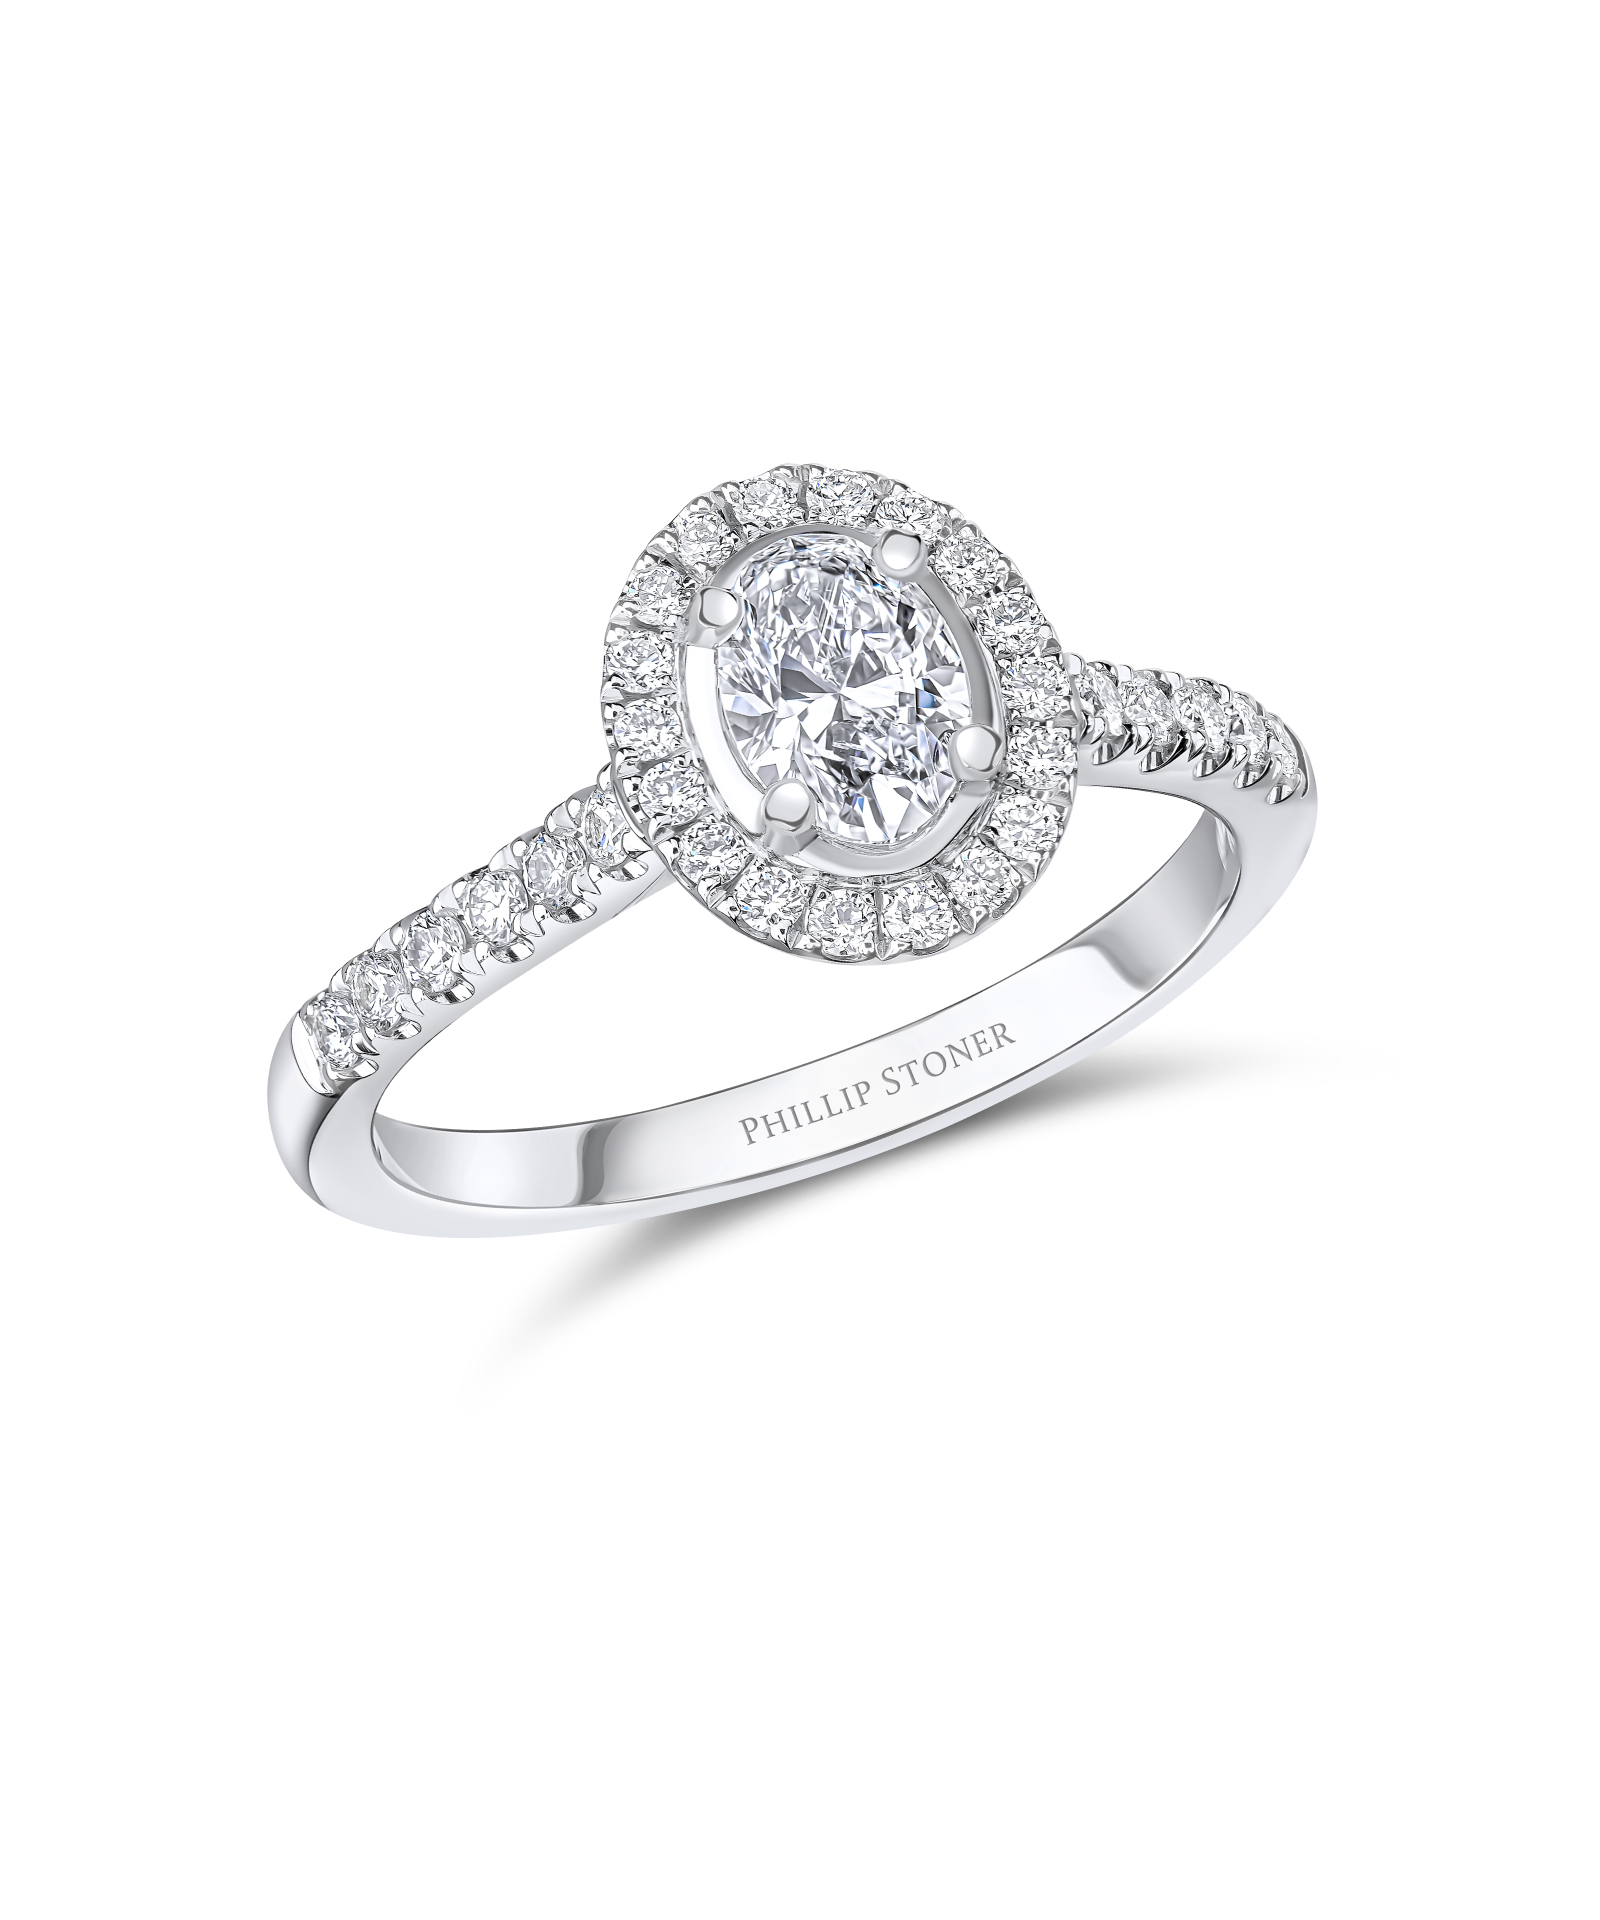 0.50ct Oval Cut Diamond Cluster Engagement Ring - Phillip Stoner The Jeweller